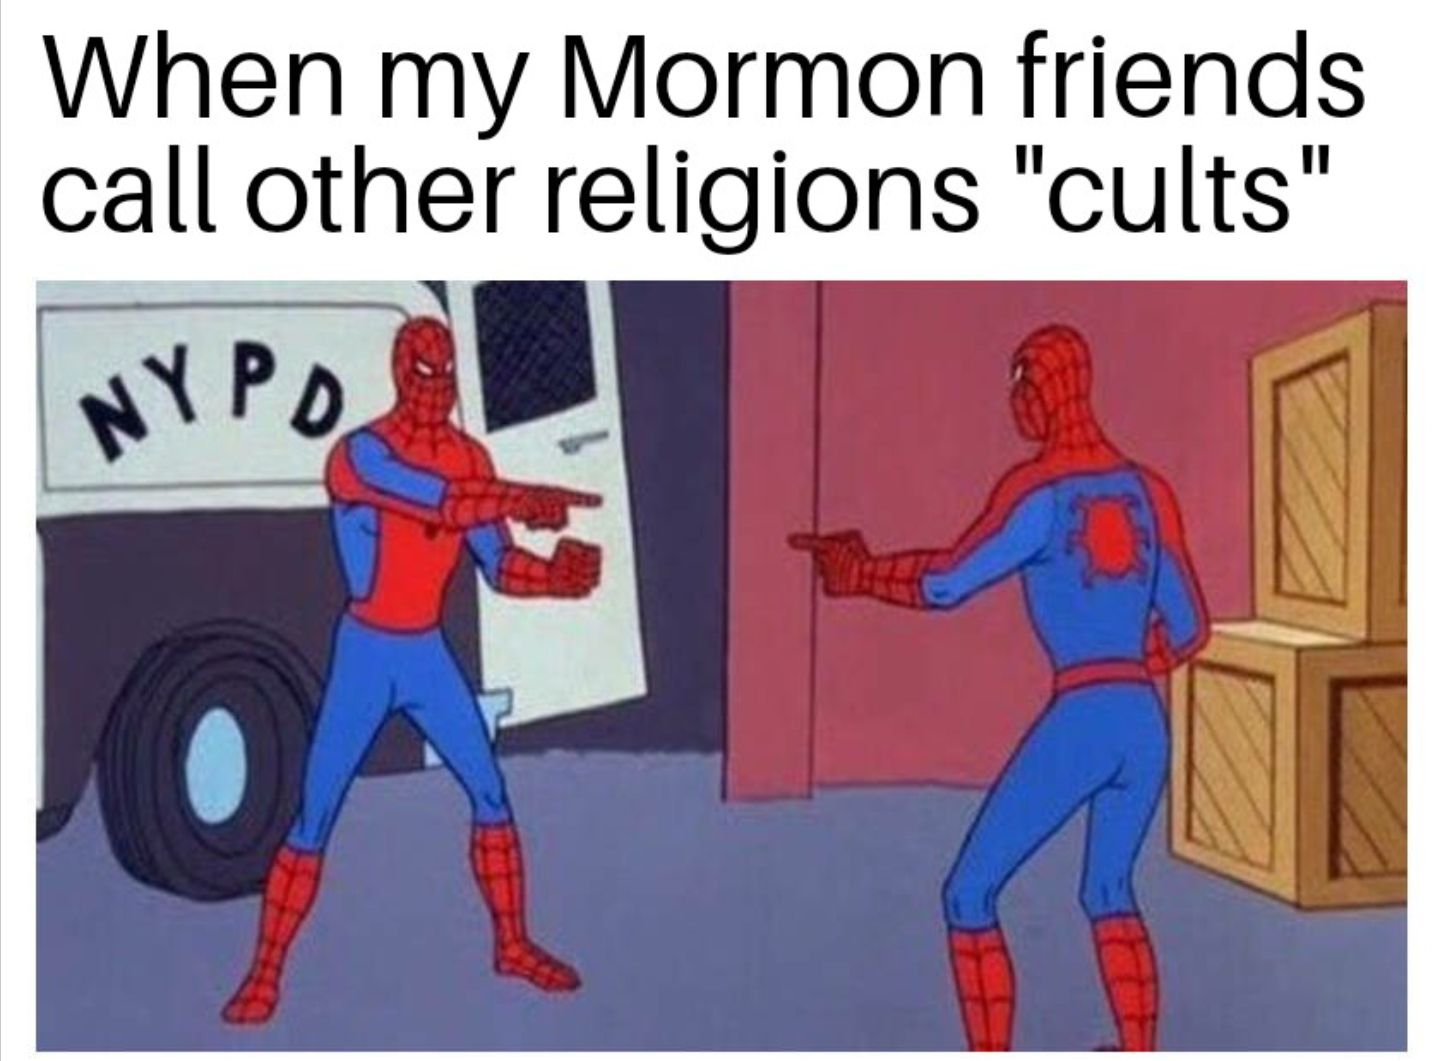 Religion is just a perpetual battle of no me.